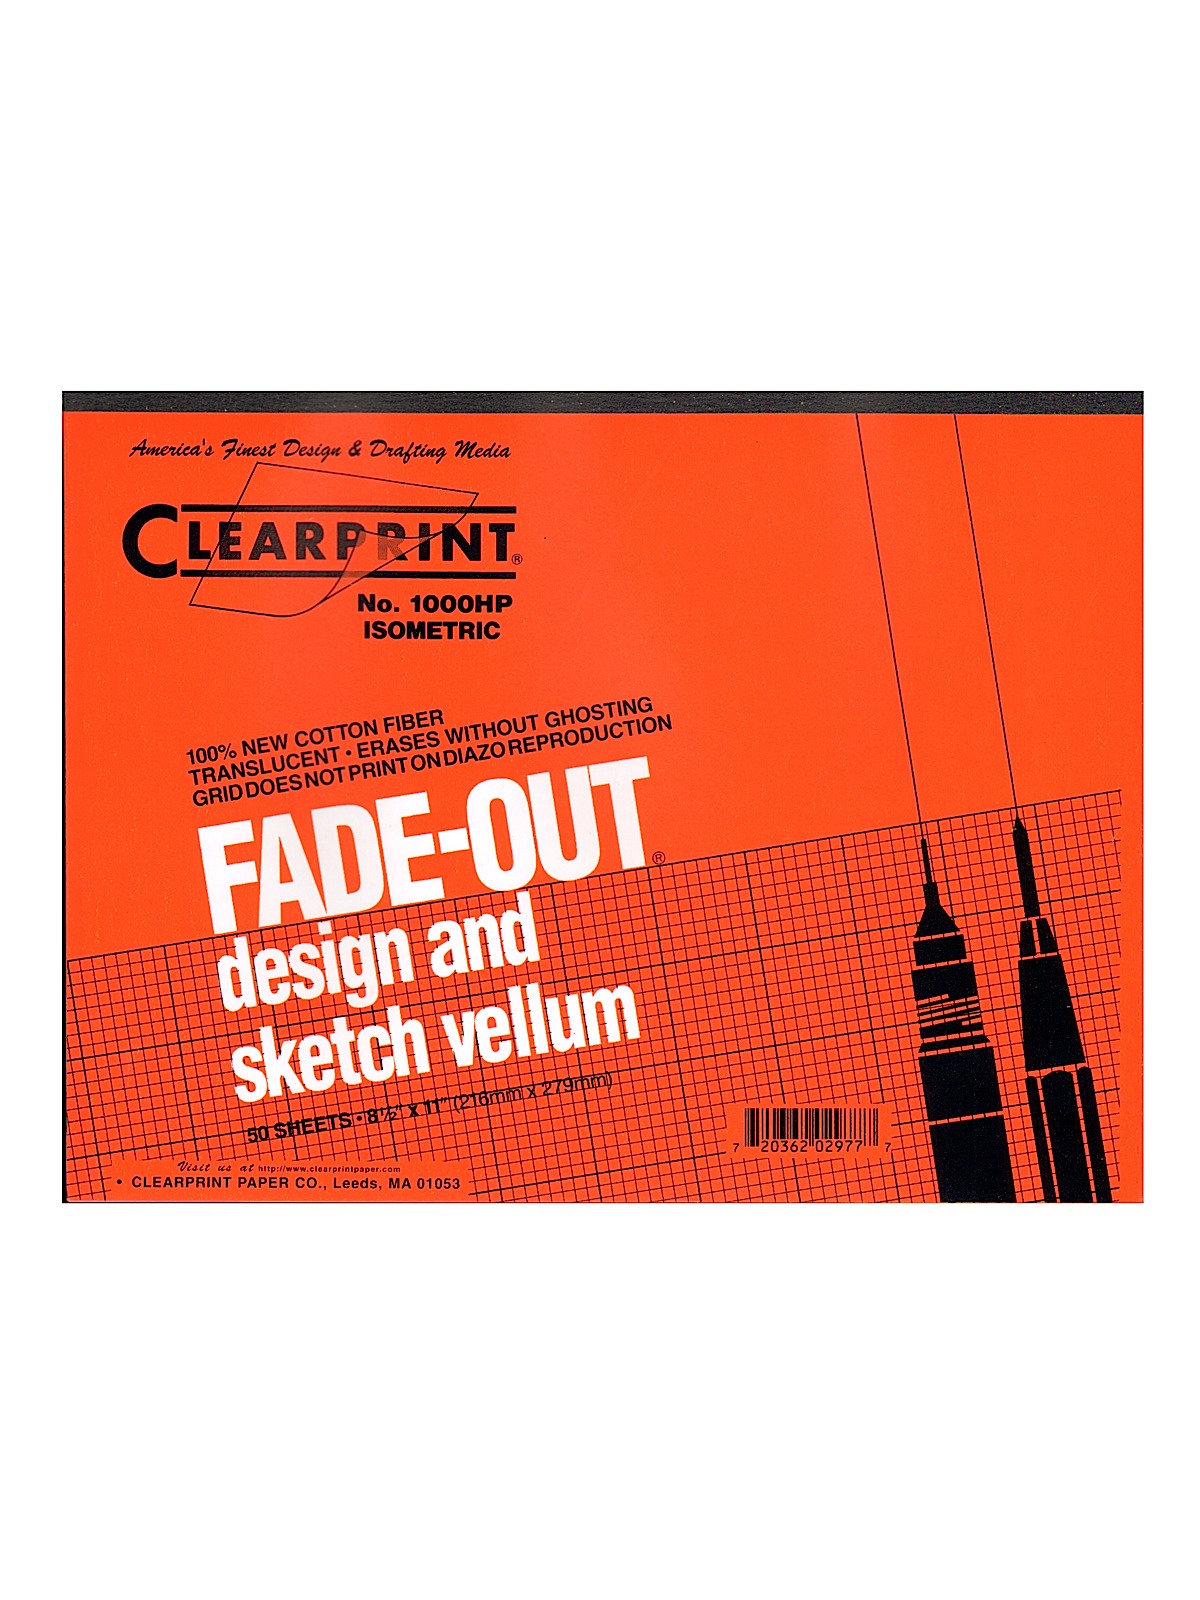 Fade-Out Design And Sketch Vellum - Isometric 8 1 2 In. X 11 In.